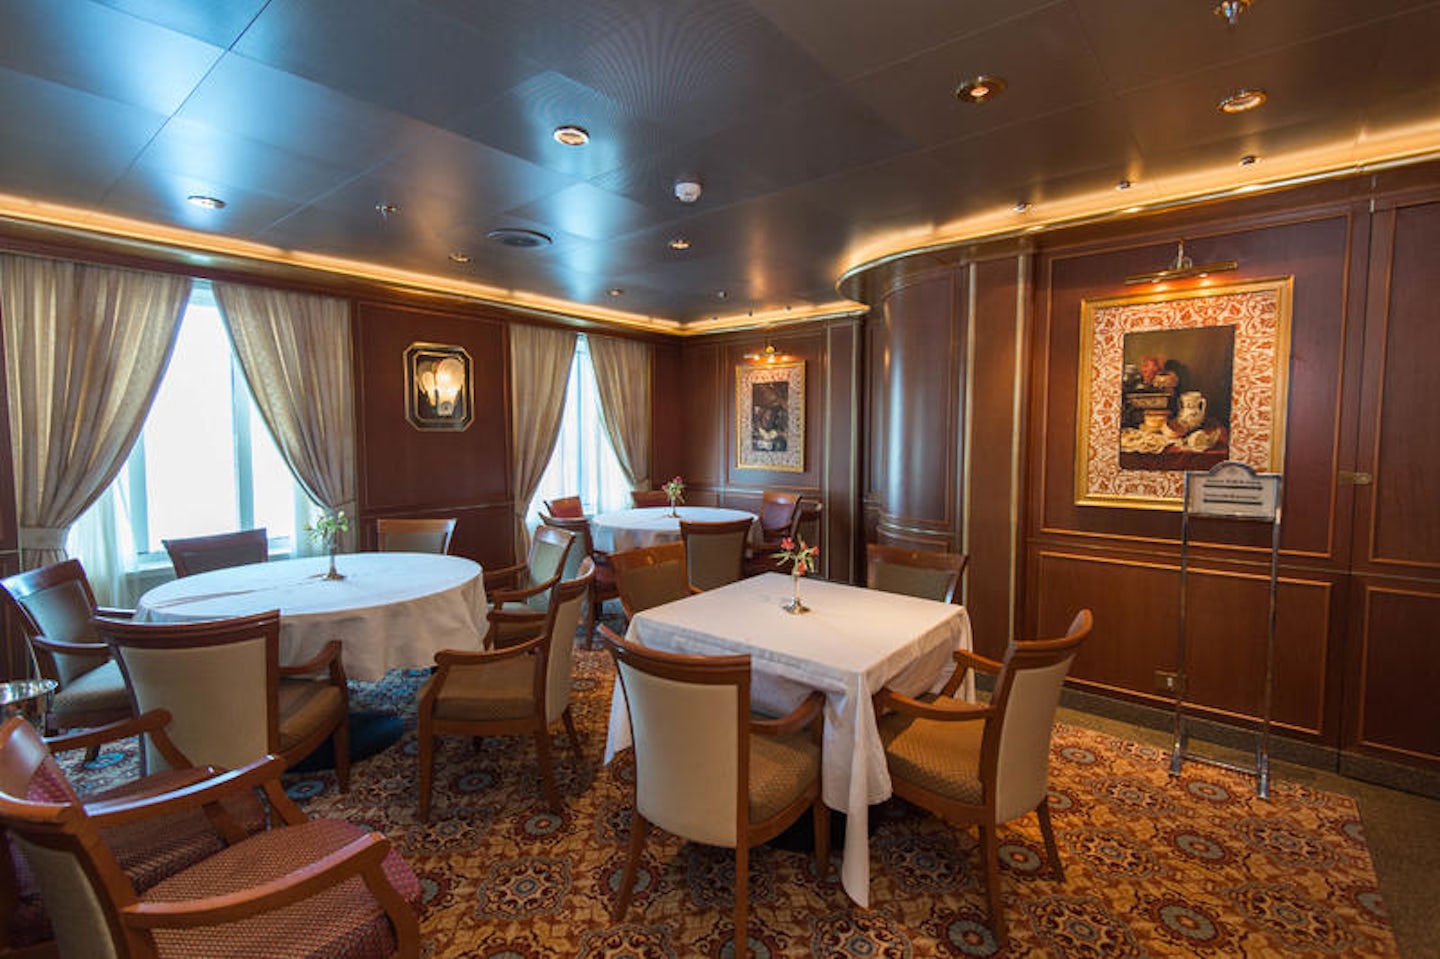 Michelangelo Dining Room on Ruby Princess